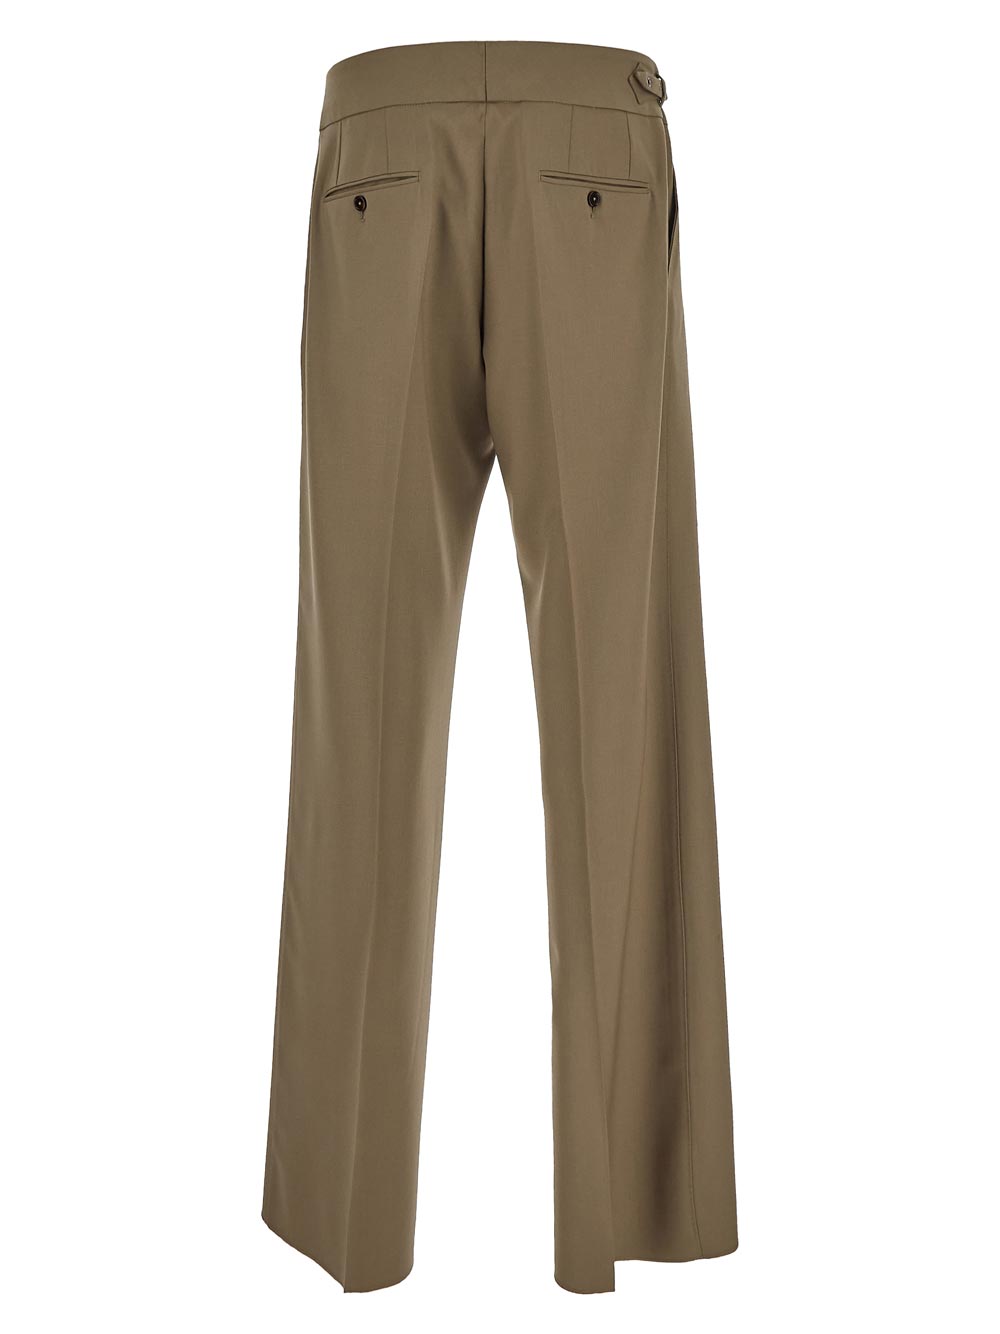 Dolce & Gabbana Tailored Two-Way Stretch Twill Pants